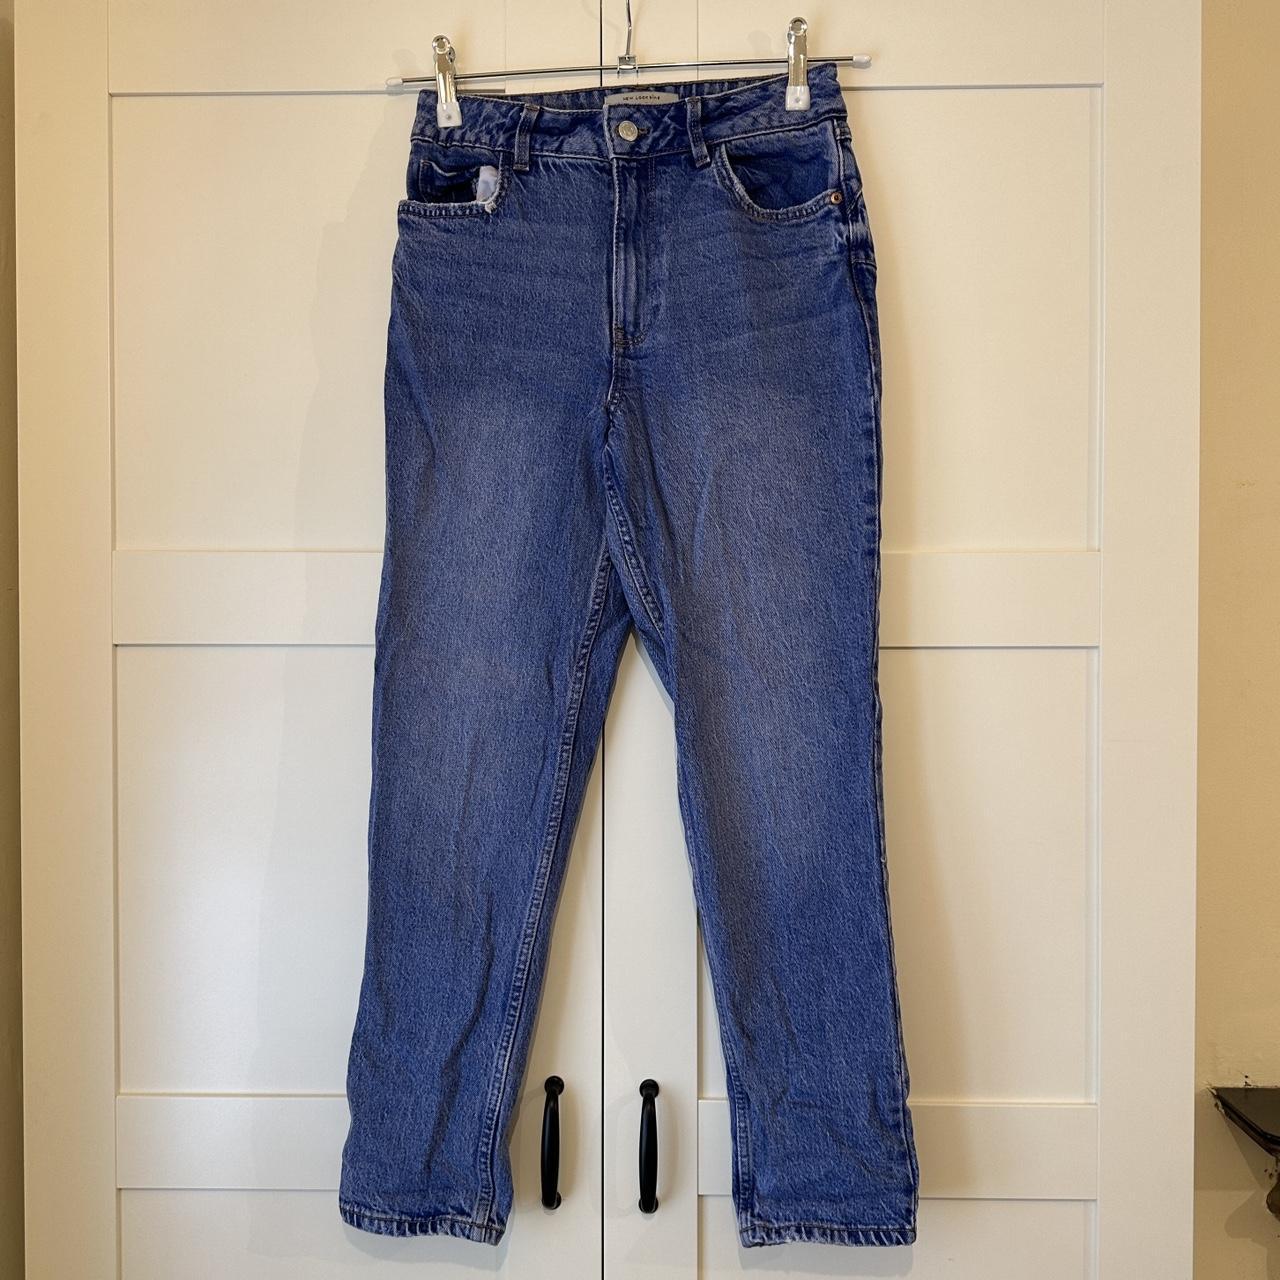 New Look Tori jeans size 8 Worn once, they dont fit me - Depop